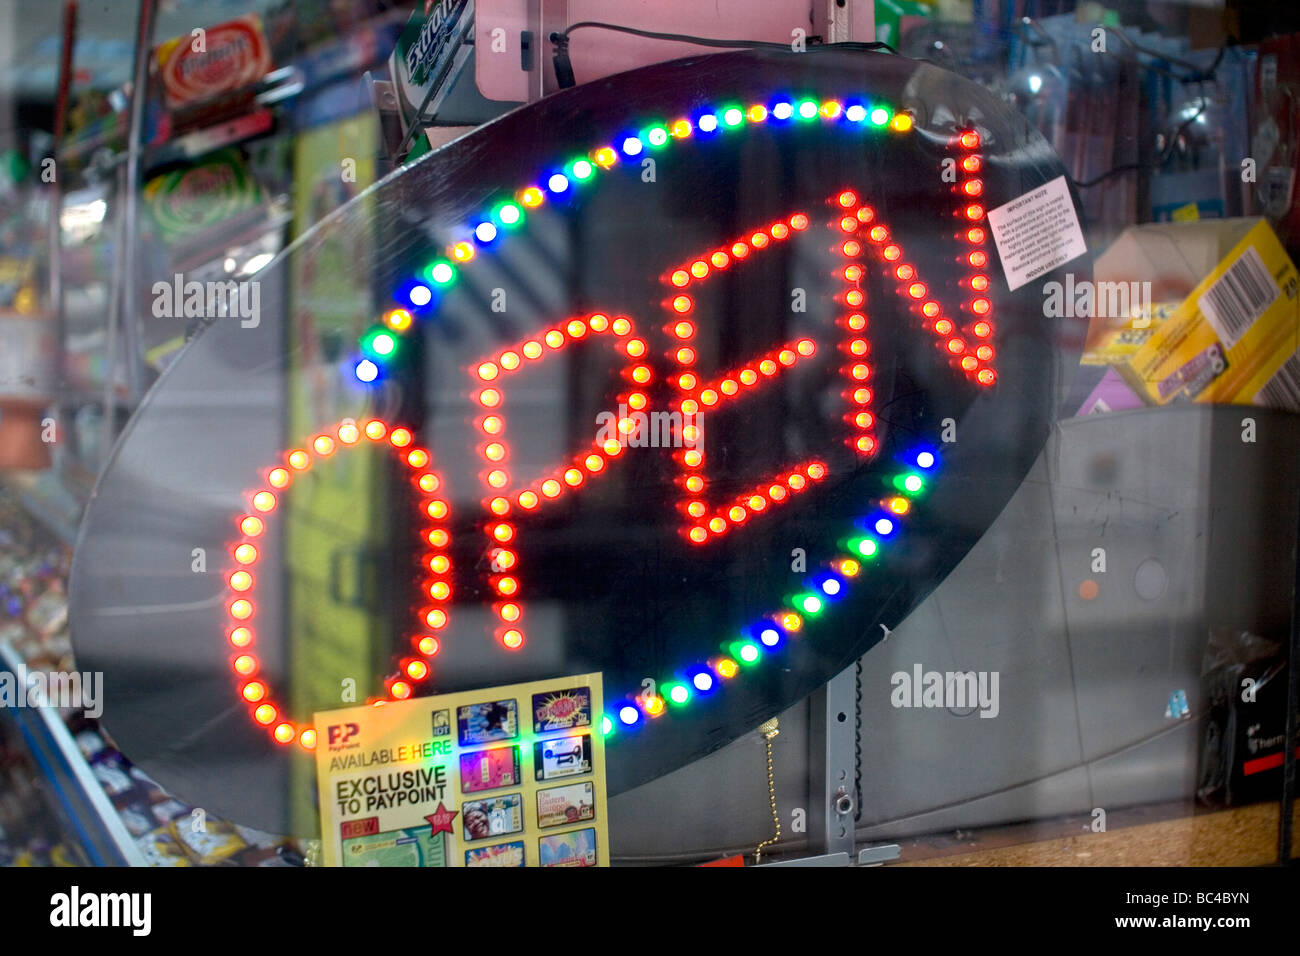 An 'Open' sign in a shop window. Stock Photo